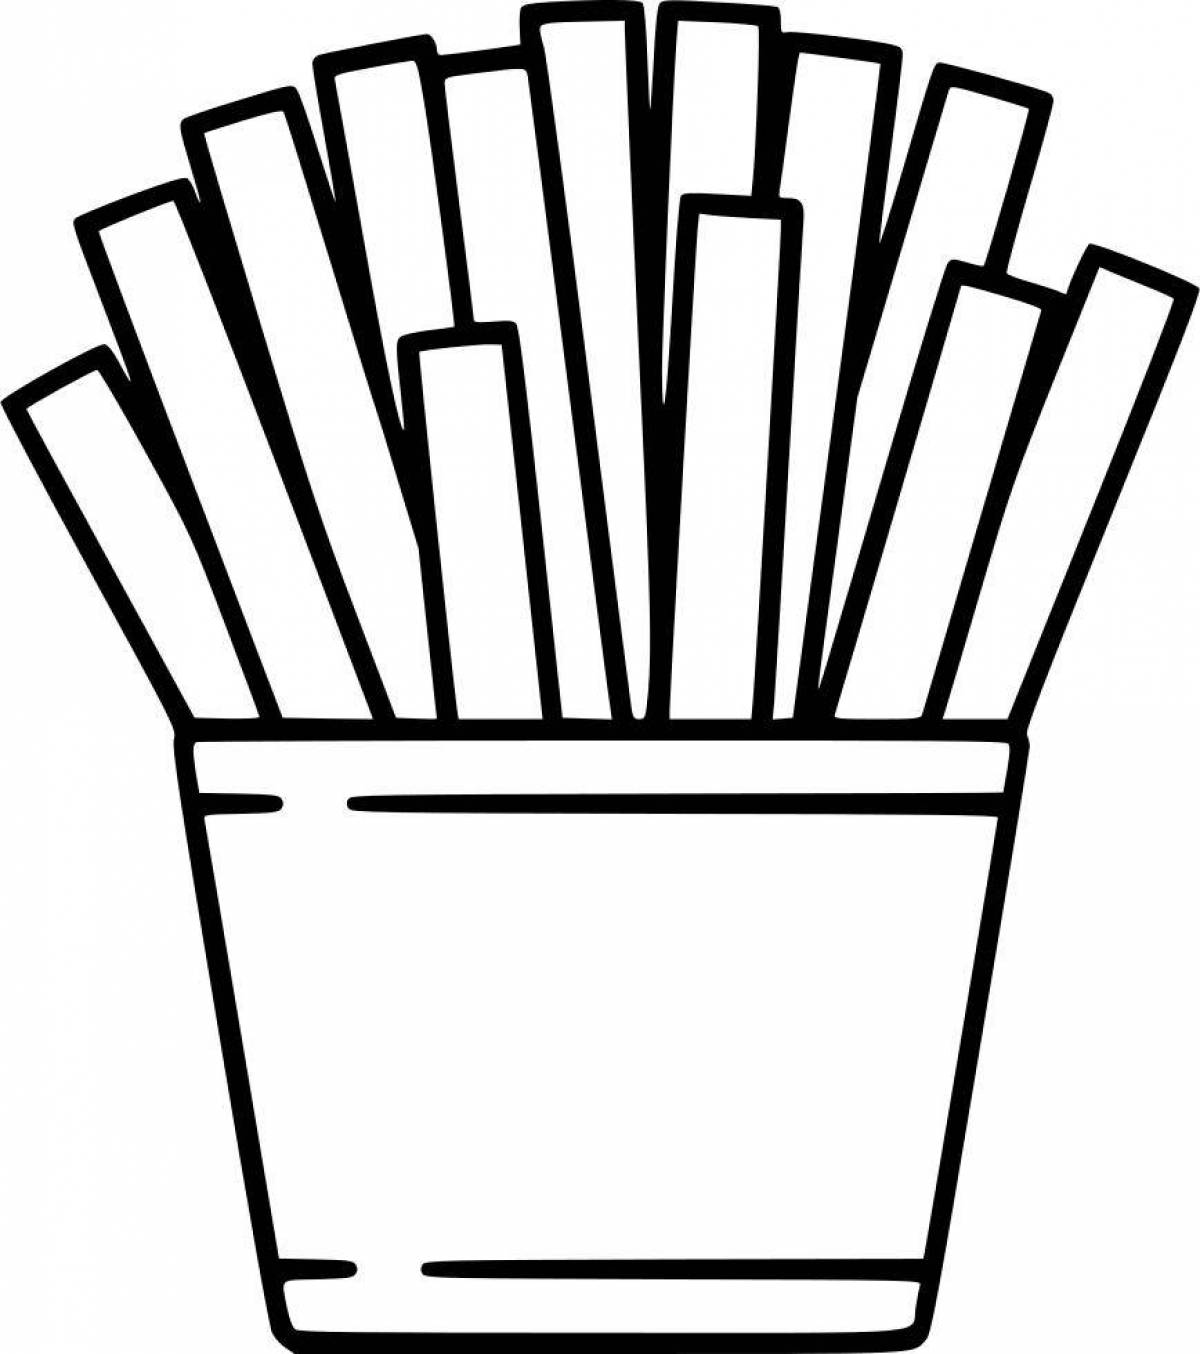 Handy coloring of french fries for kids